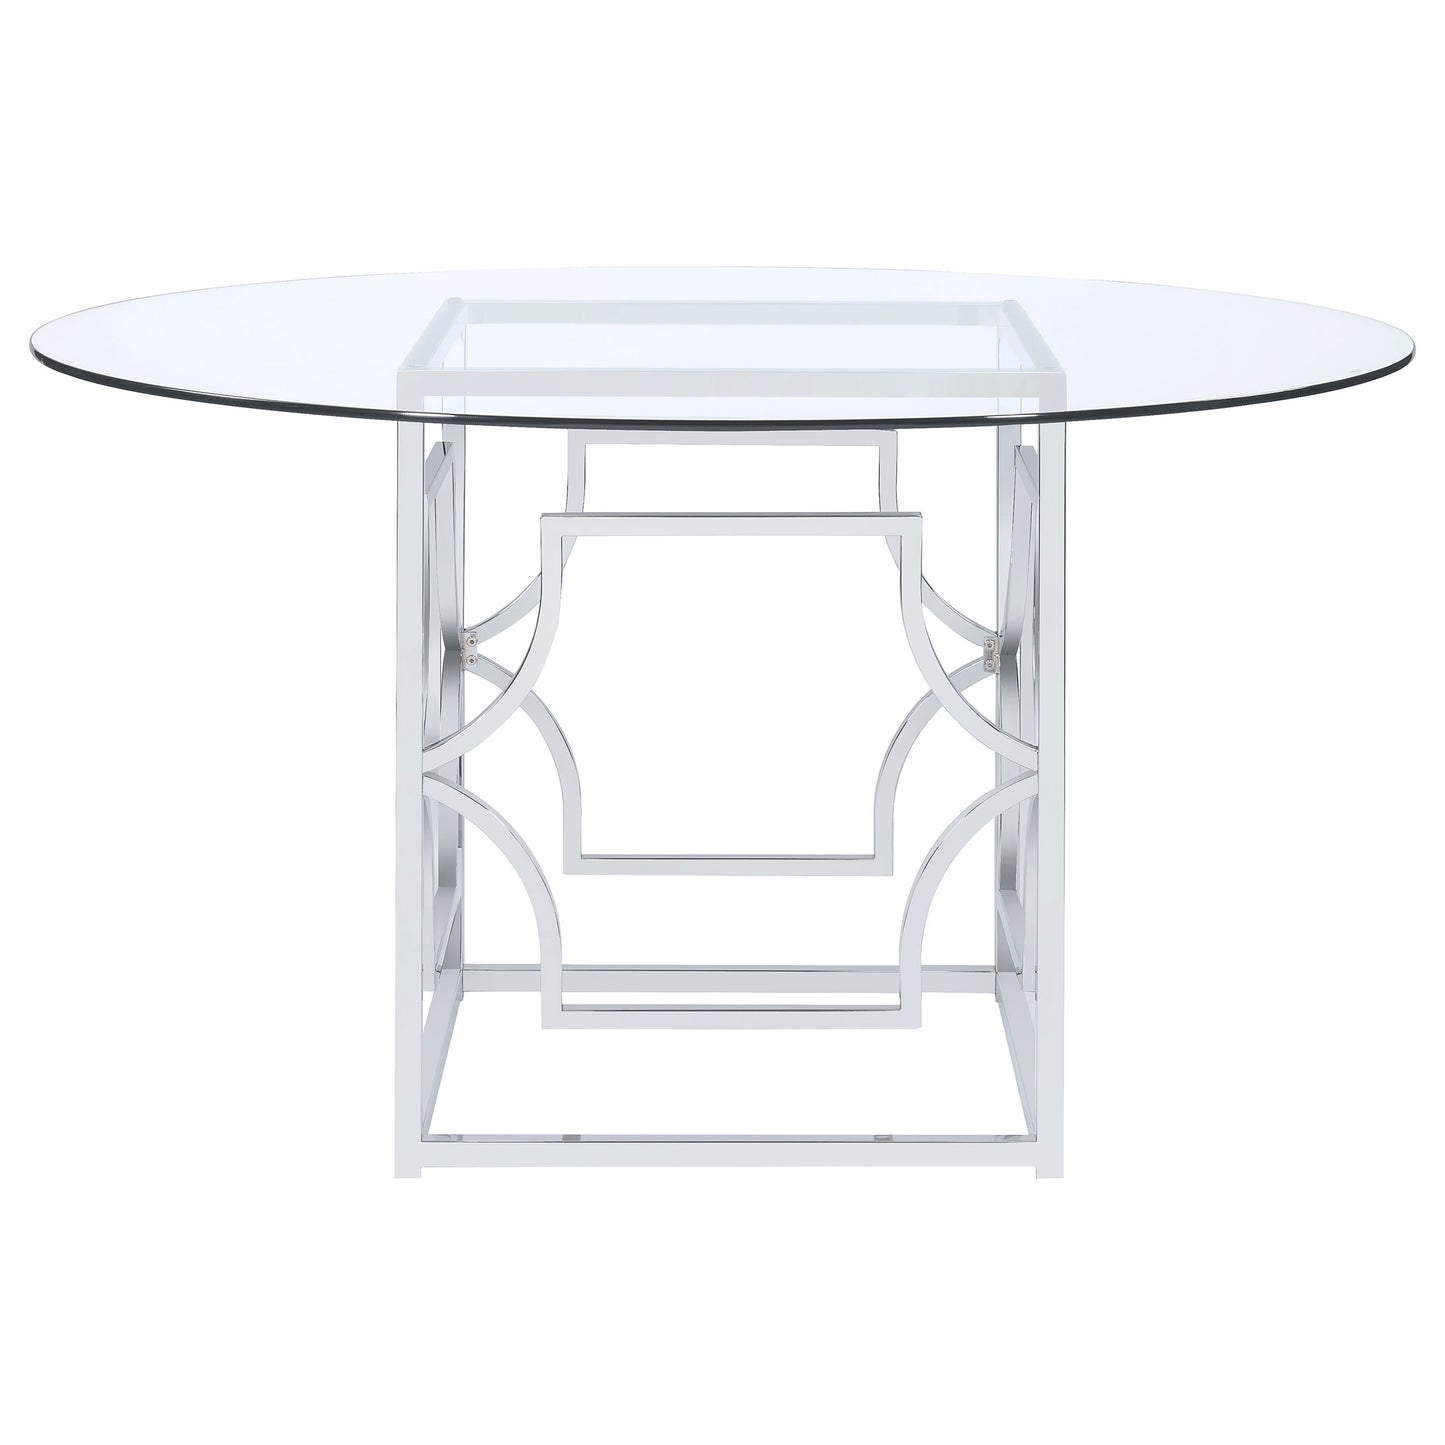 Starlight Round Glass Top Dining Table Clear and Chrome